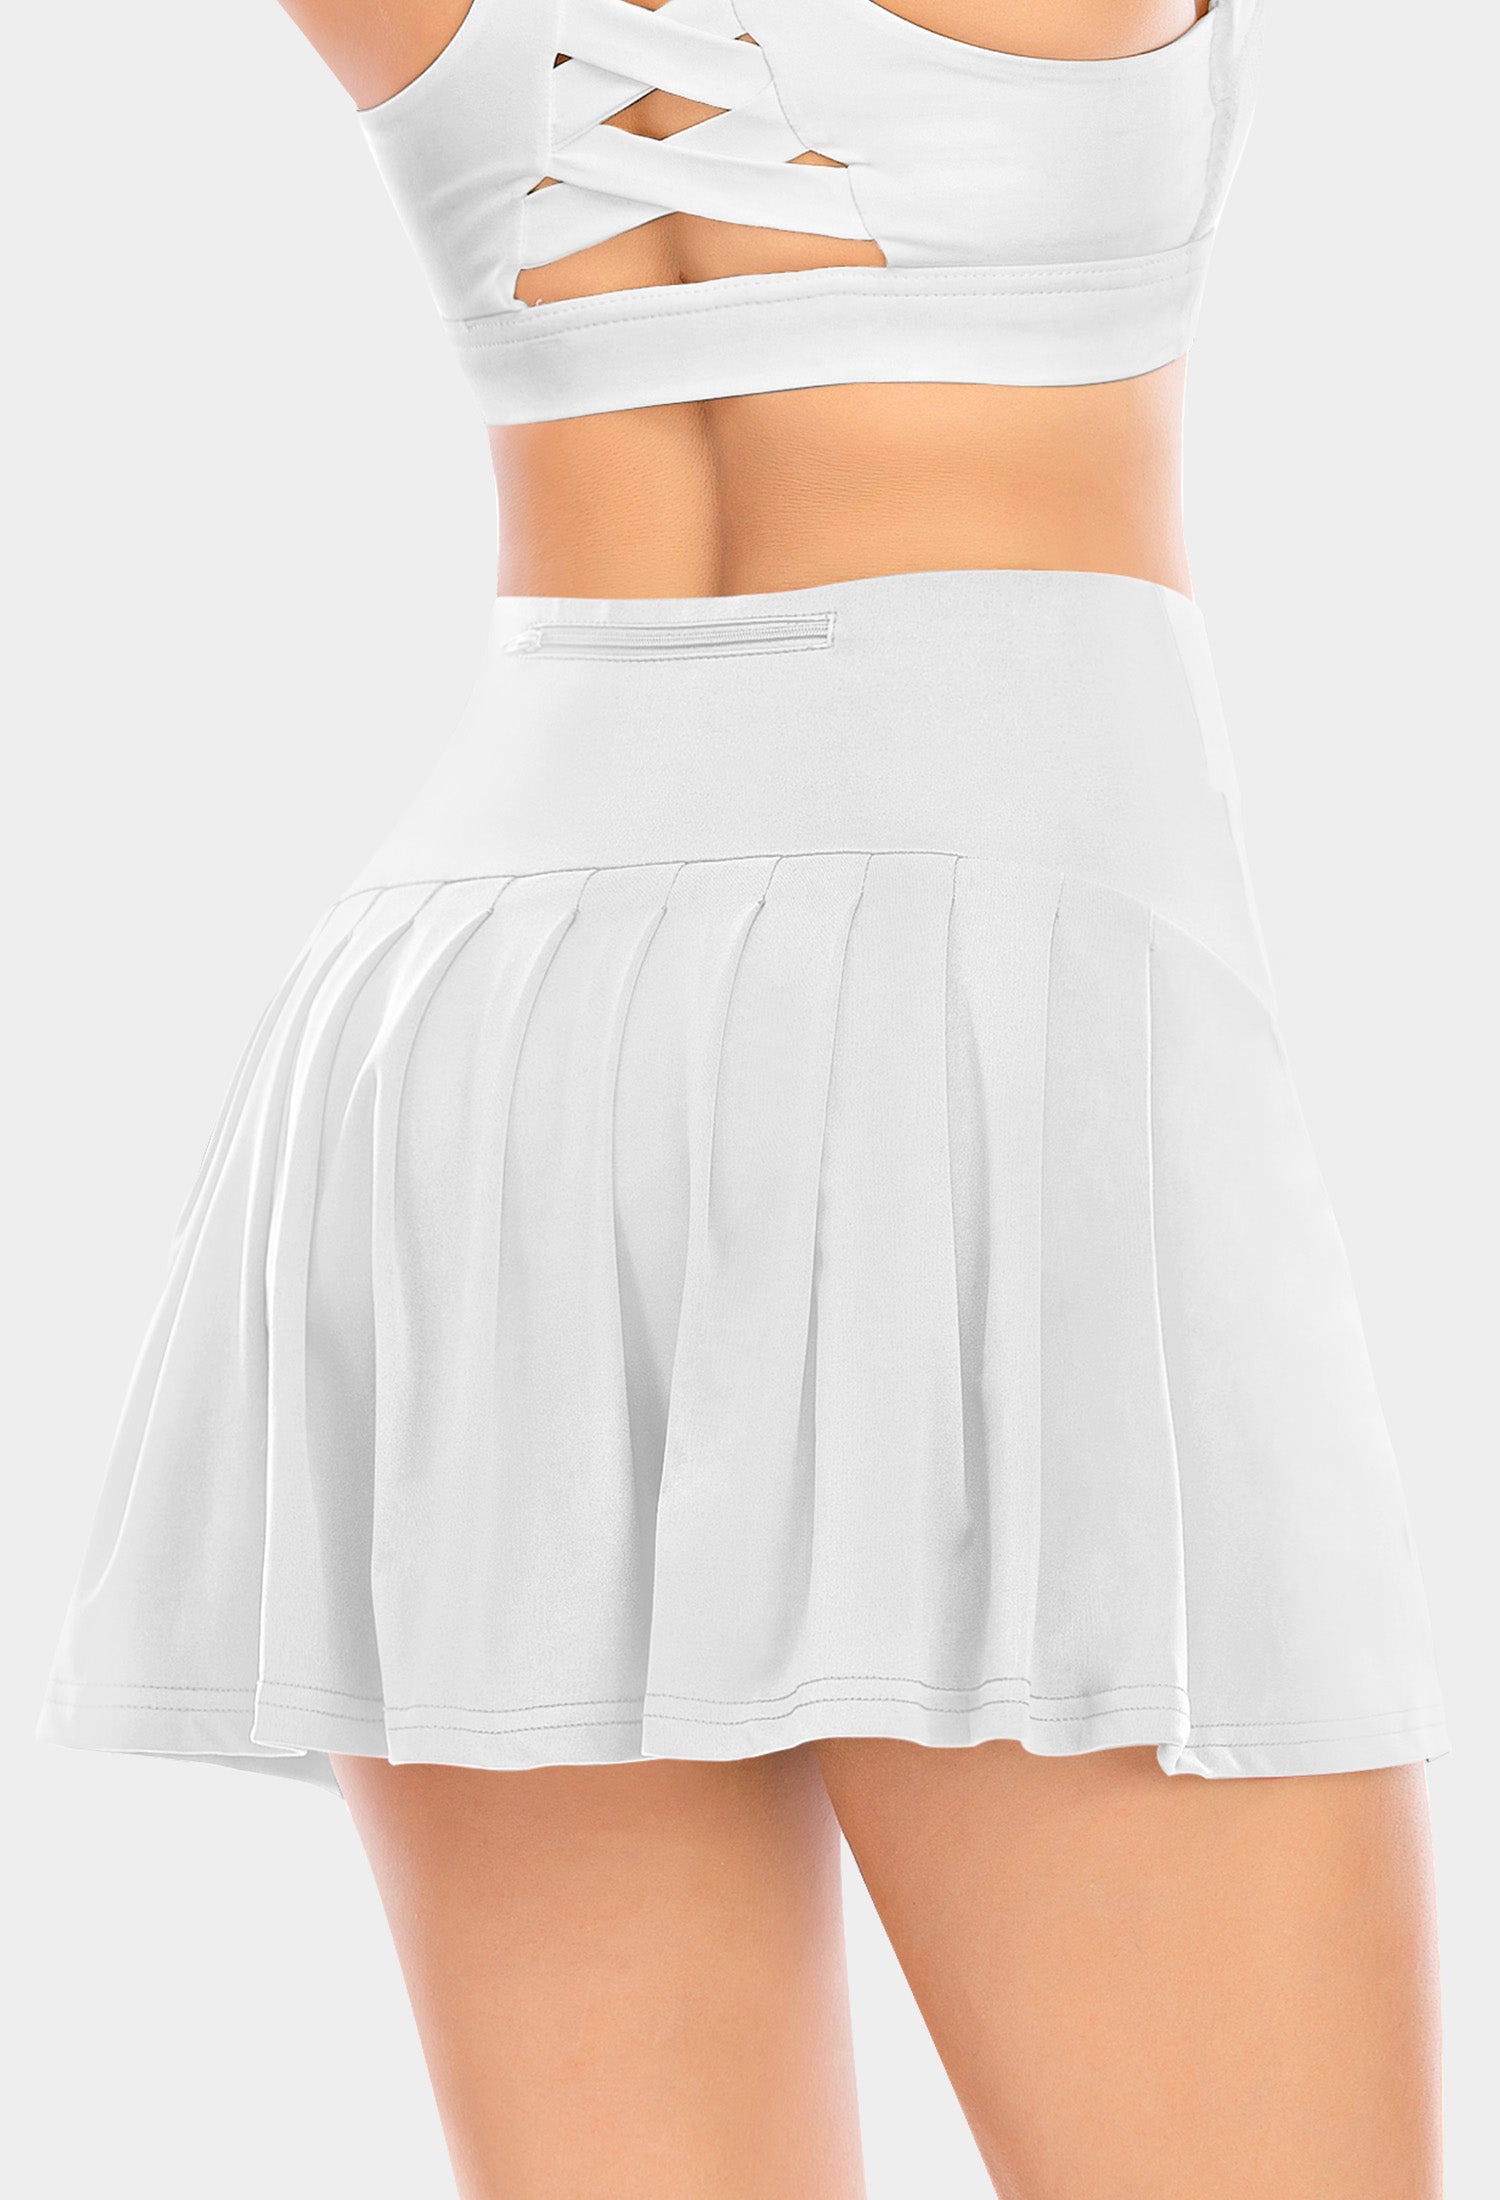 Werena Pleated Tennis Skirts For Women With Pockets